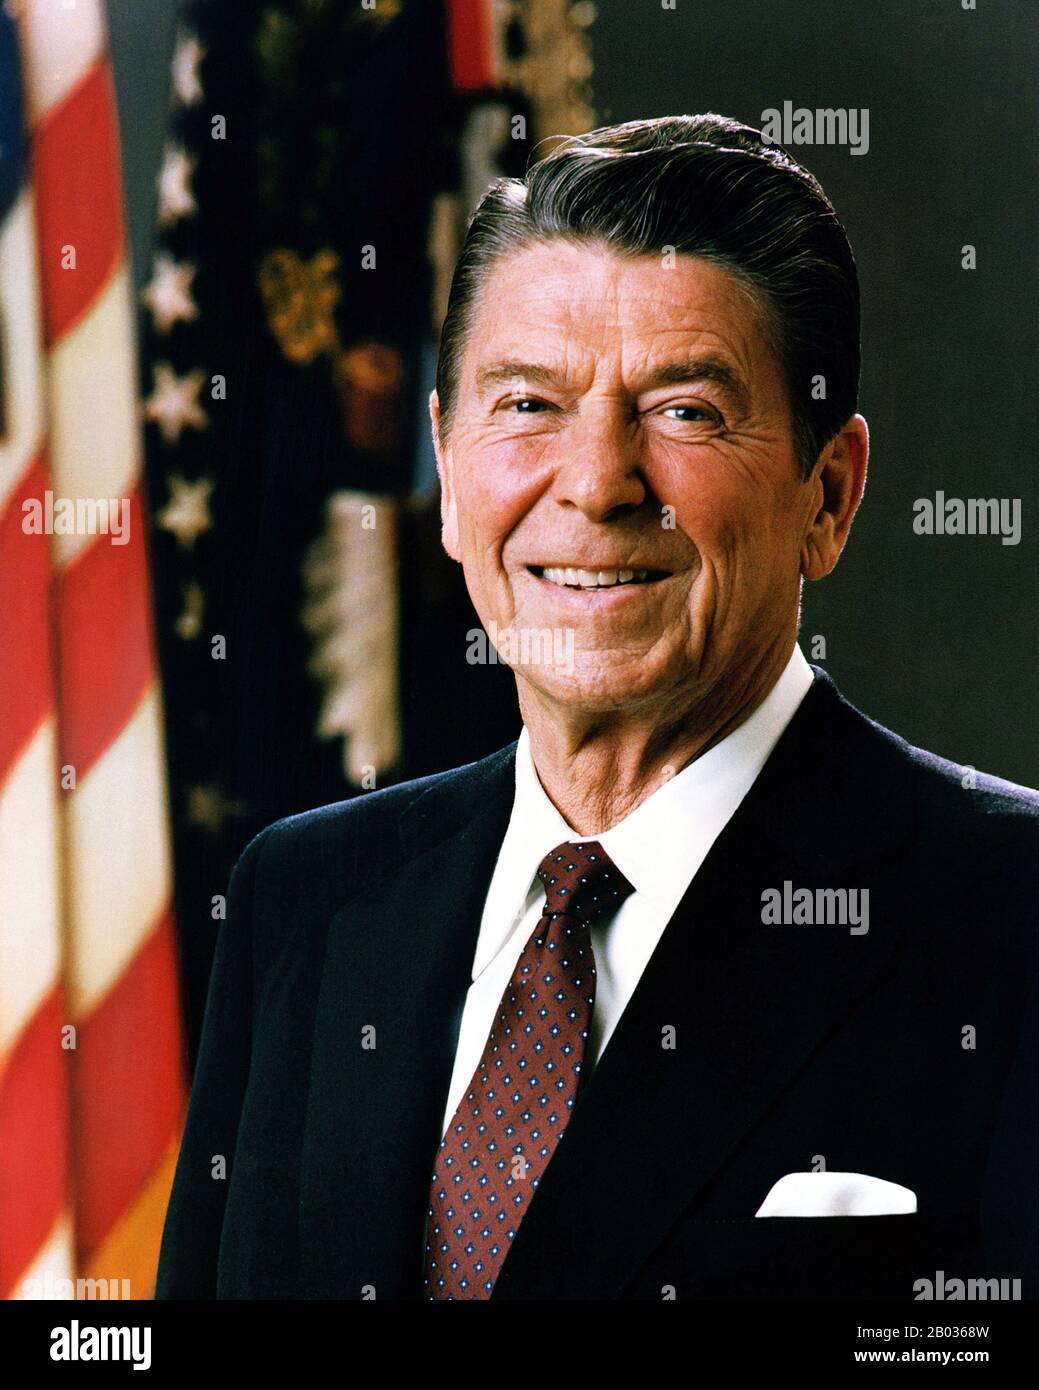 Ronald Wilson Reagan (February 6, 1911 – June 5, 2004, Republican) was an American politician and actor who was the 40th President of the United States, from 1981 to 1989.   Before his presidency, he was the 33rd Governor of California, from 1967 to 1975, after a career as a Hollywood actor and union leader. Stock Photo